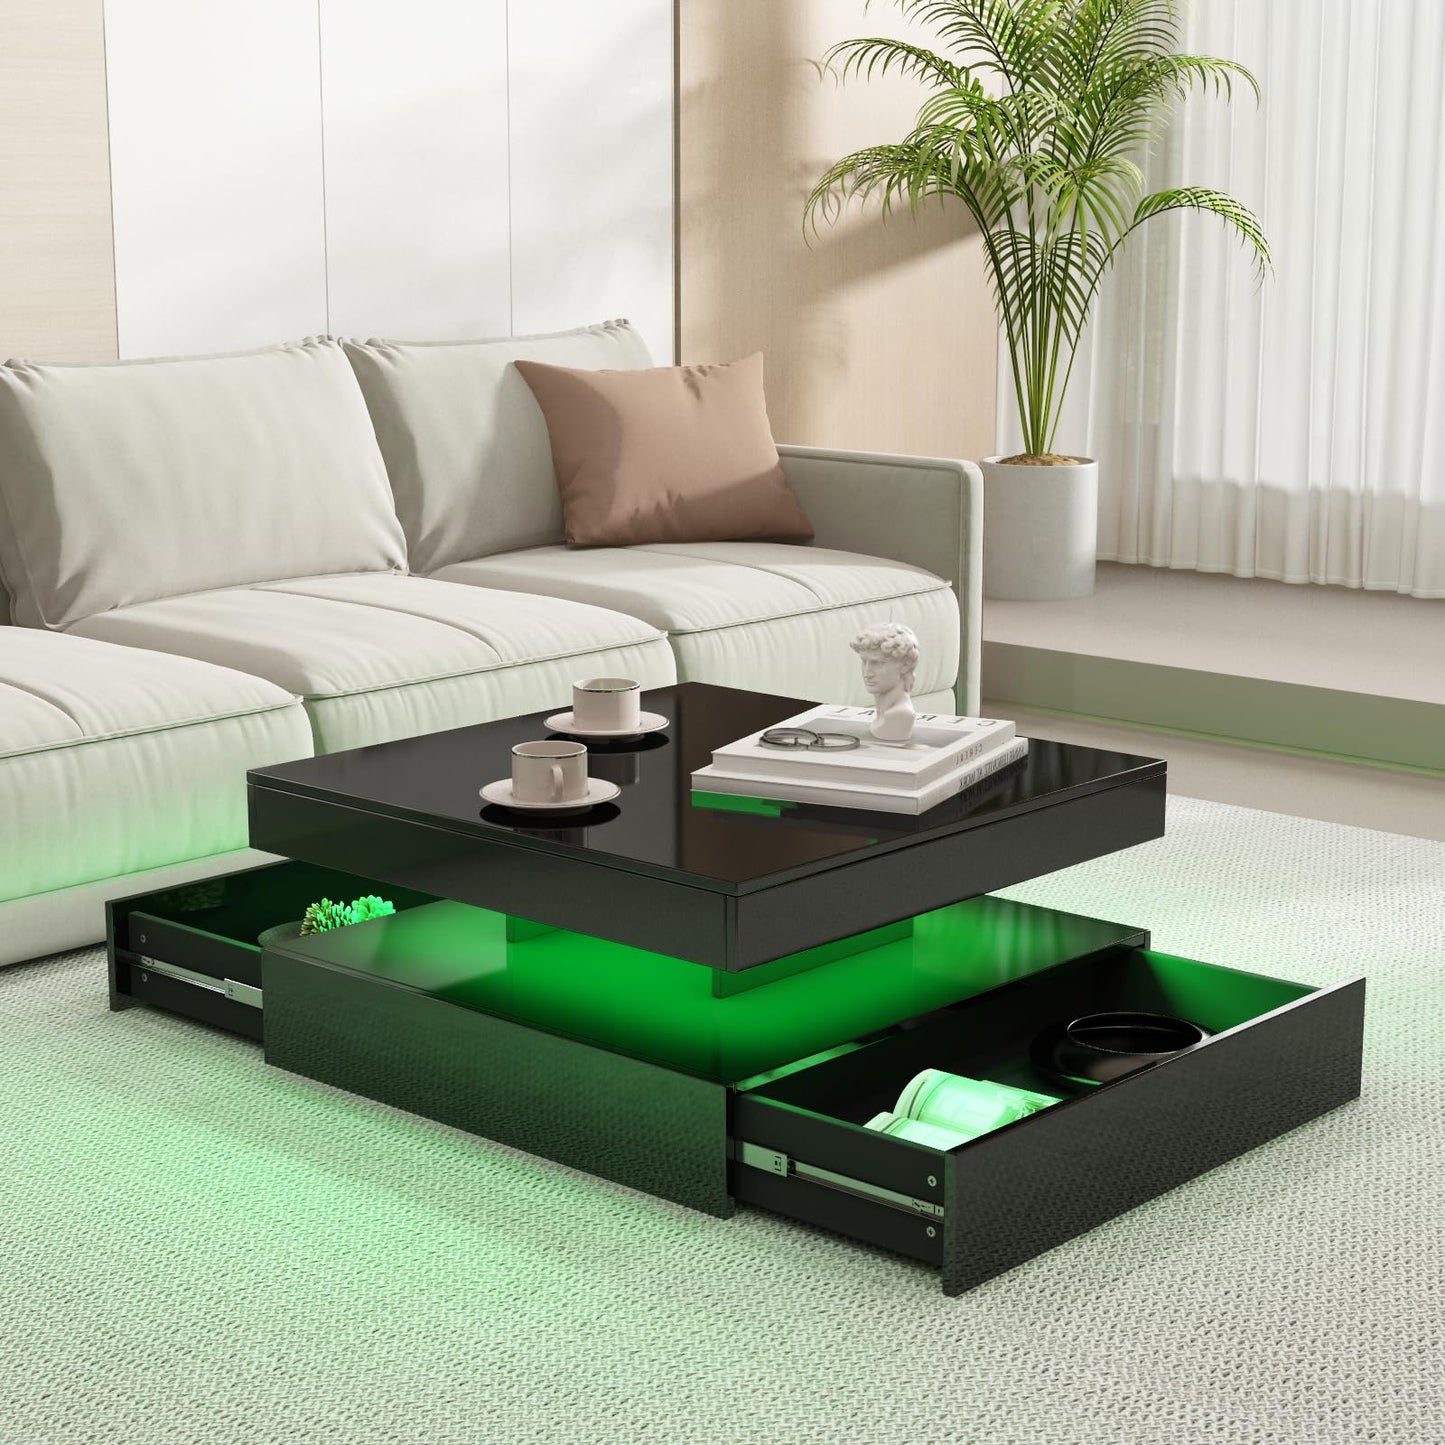 Black Coffee Table Square with LED Lights, High Glossy Center Table with Storage, Lighted Cocktail Table with Sliding Drawers, Modern Mid Century Table for Living Room, Home and Office